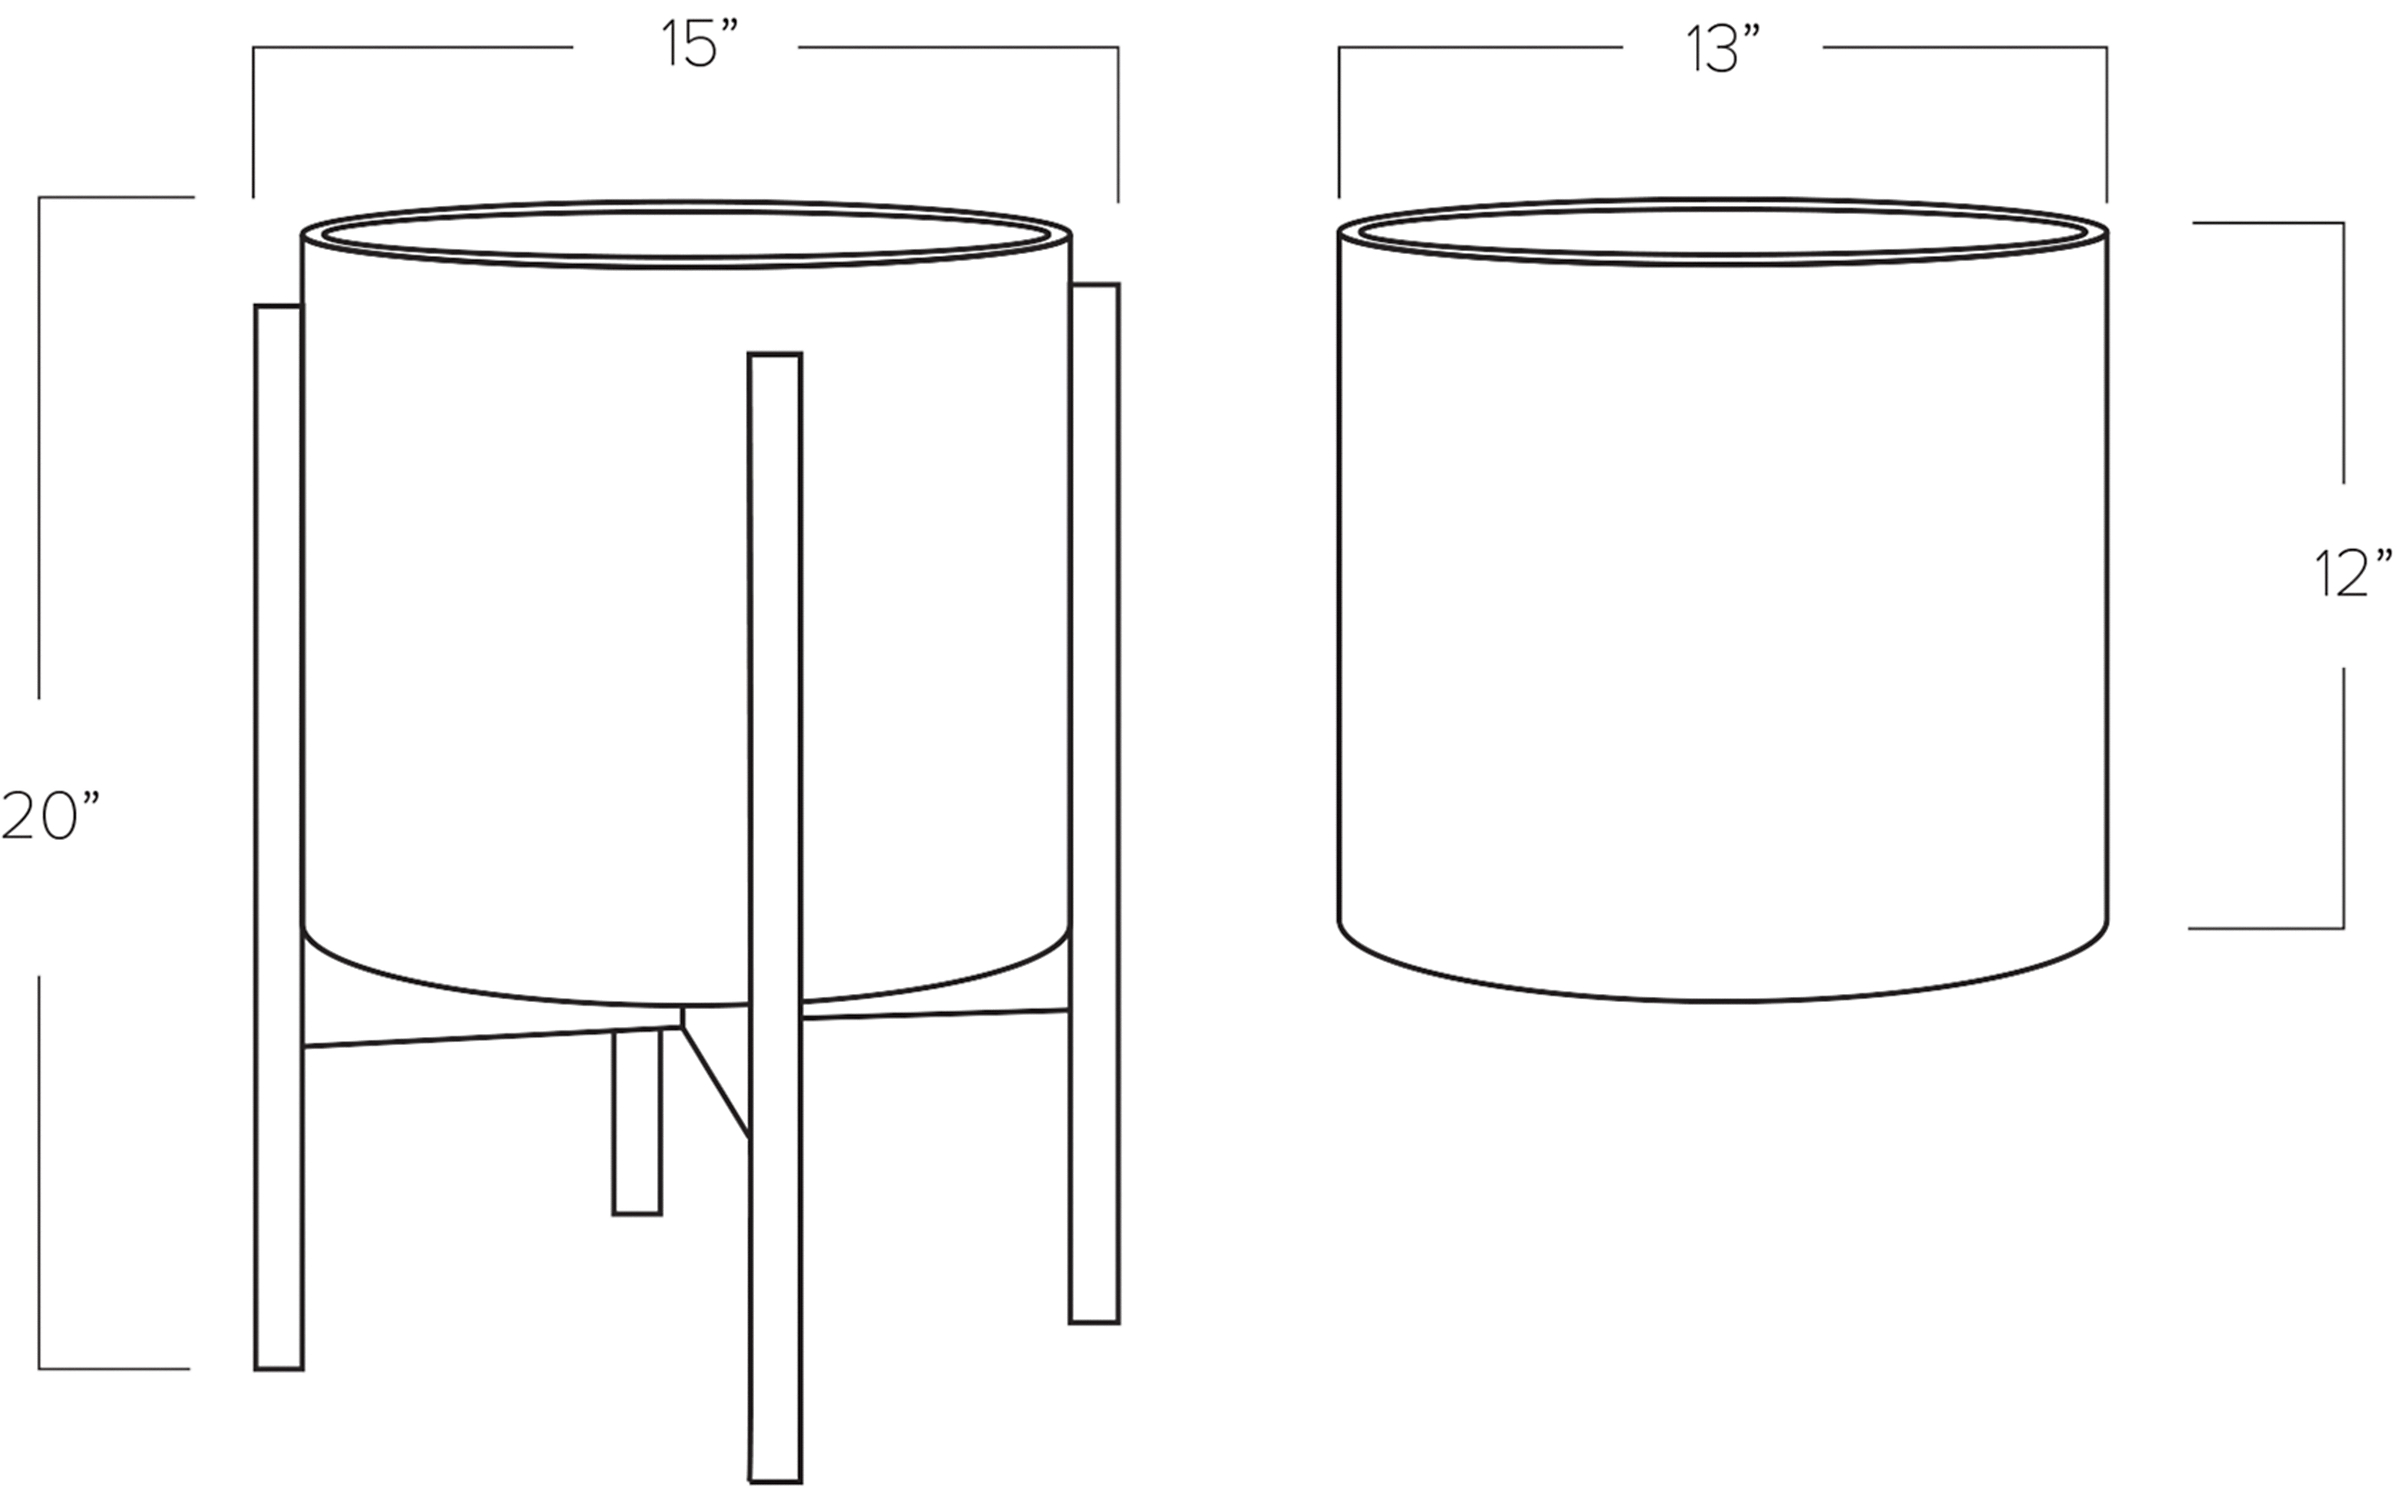 Dimension Drawing of Case Study 15w 20h 13 round Planter with Wood Stand.